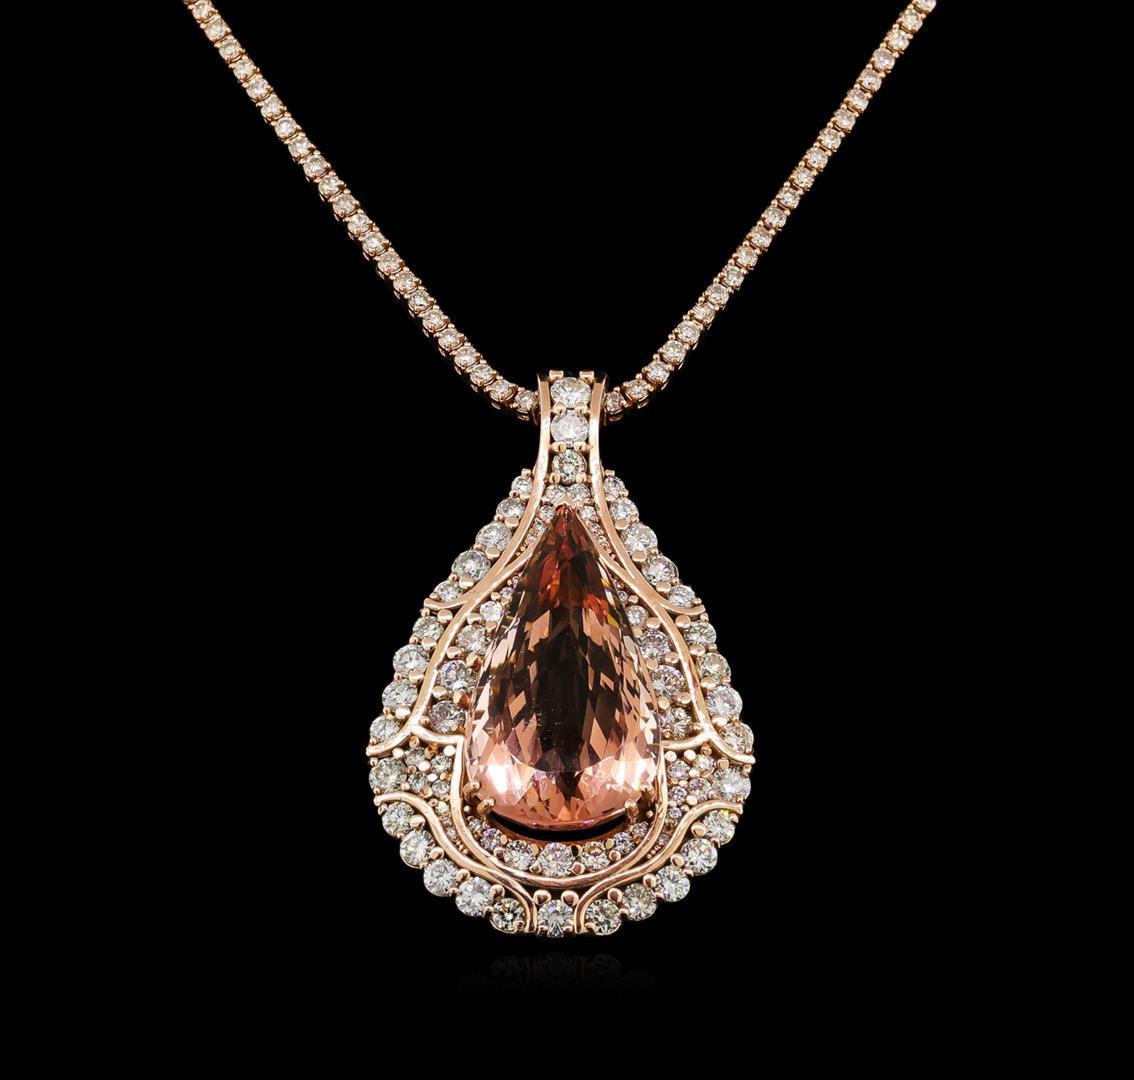 14KT Rose Gold GIA Certified 49.49 ctw Morganite and Diamond Pendant With Chain